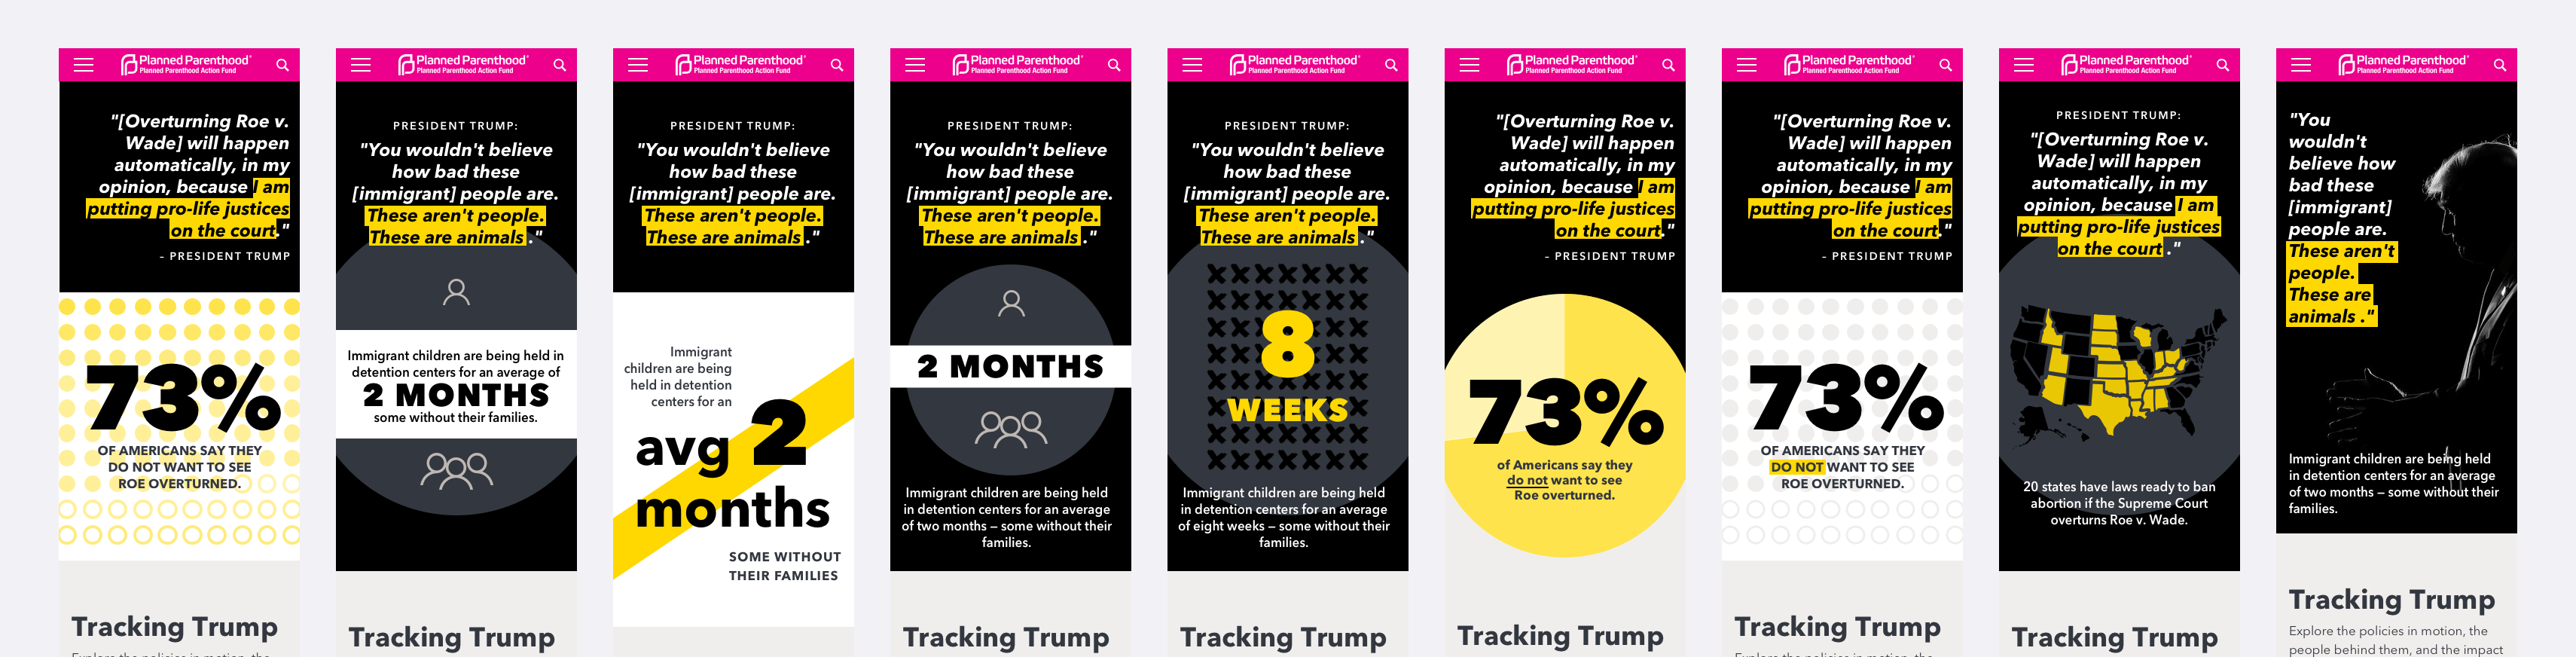 Tracking Tr*mp visual design options for homepage hero